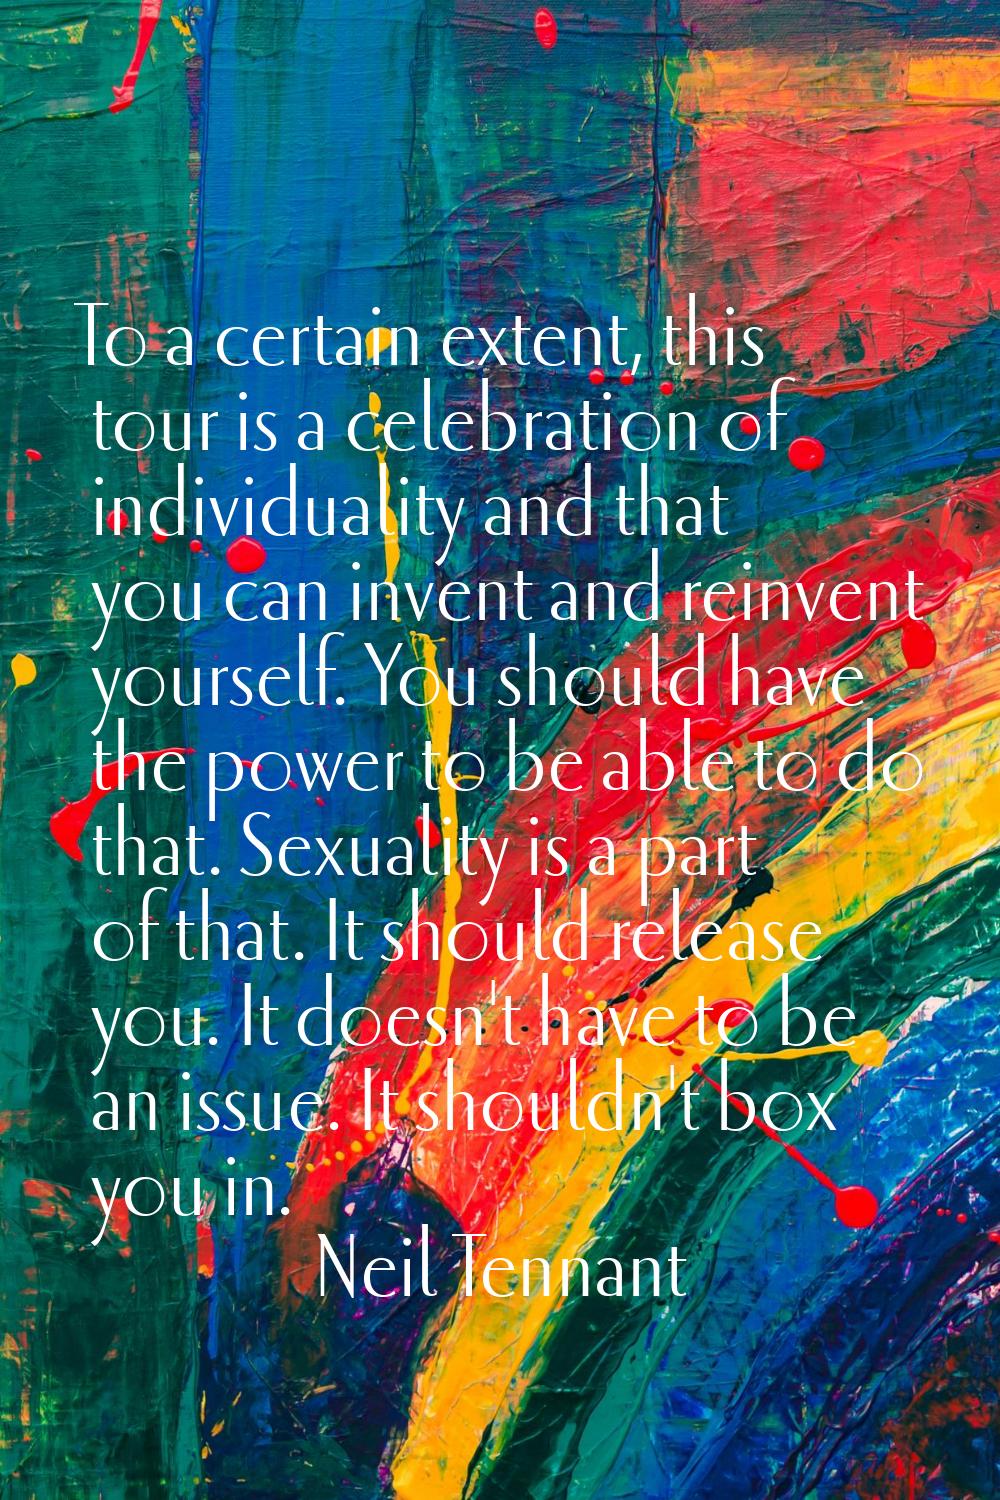 To a certain extent, this tour is a celebration of individuality and that you can invent and reinve